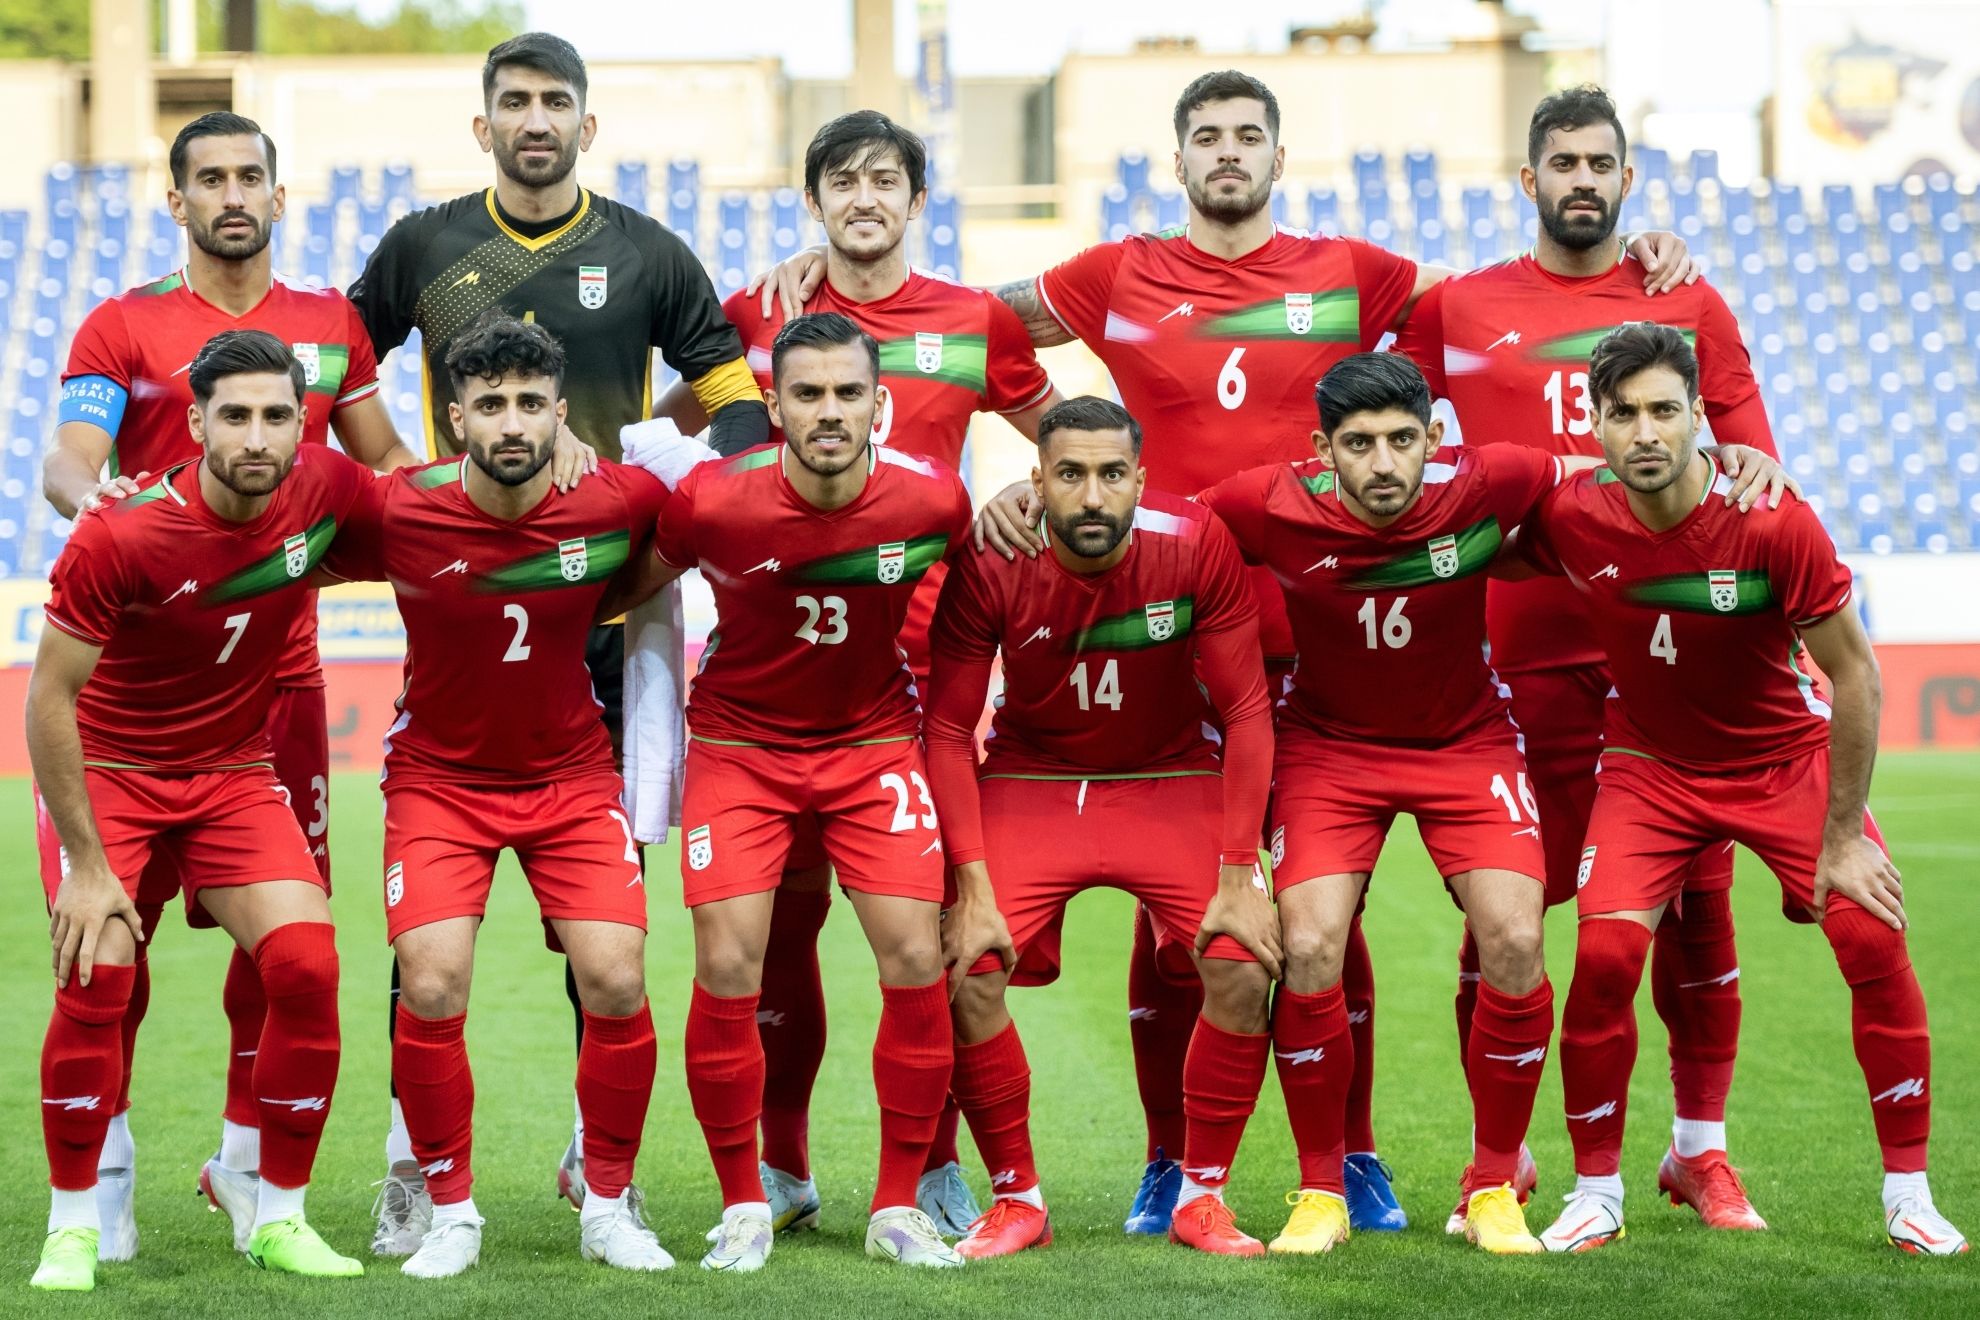 Iranian fans boo the national anthem before the start of the 2022 World Cup match with England